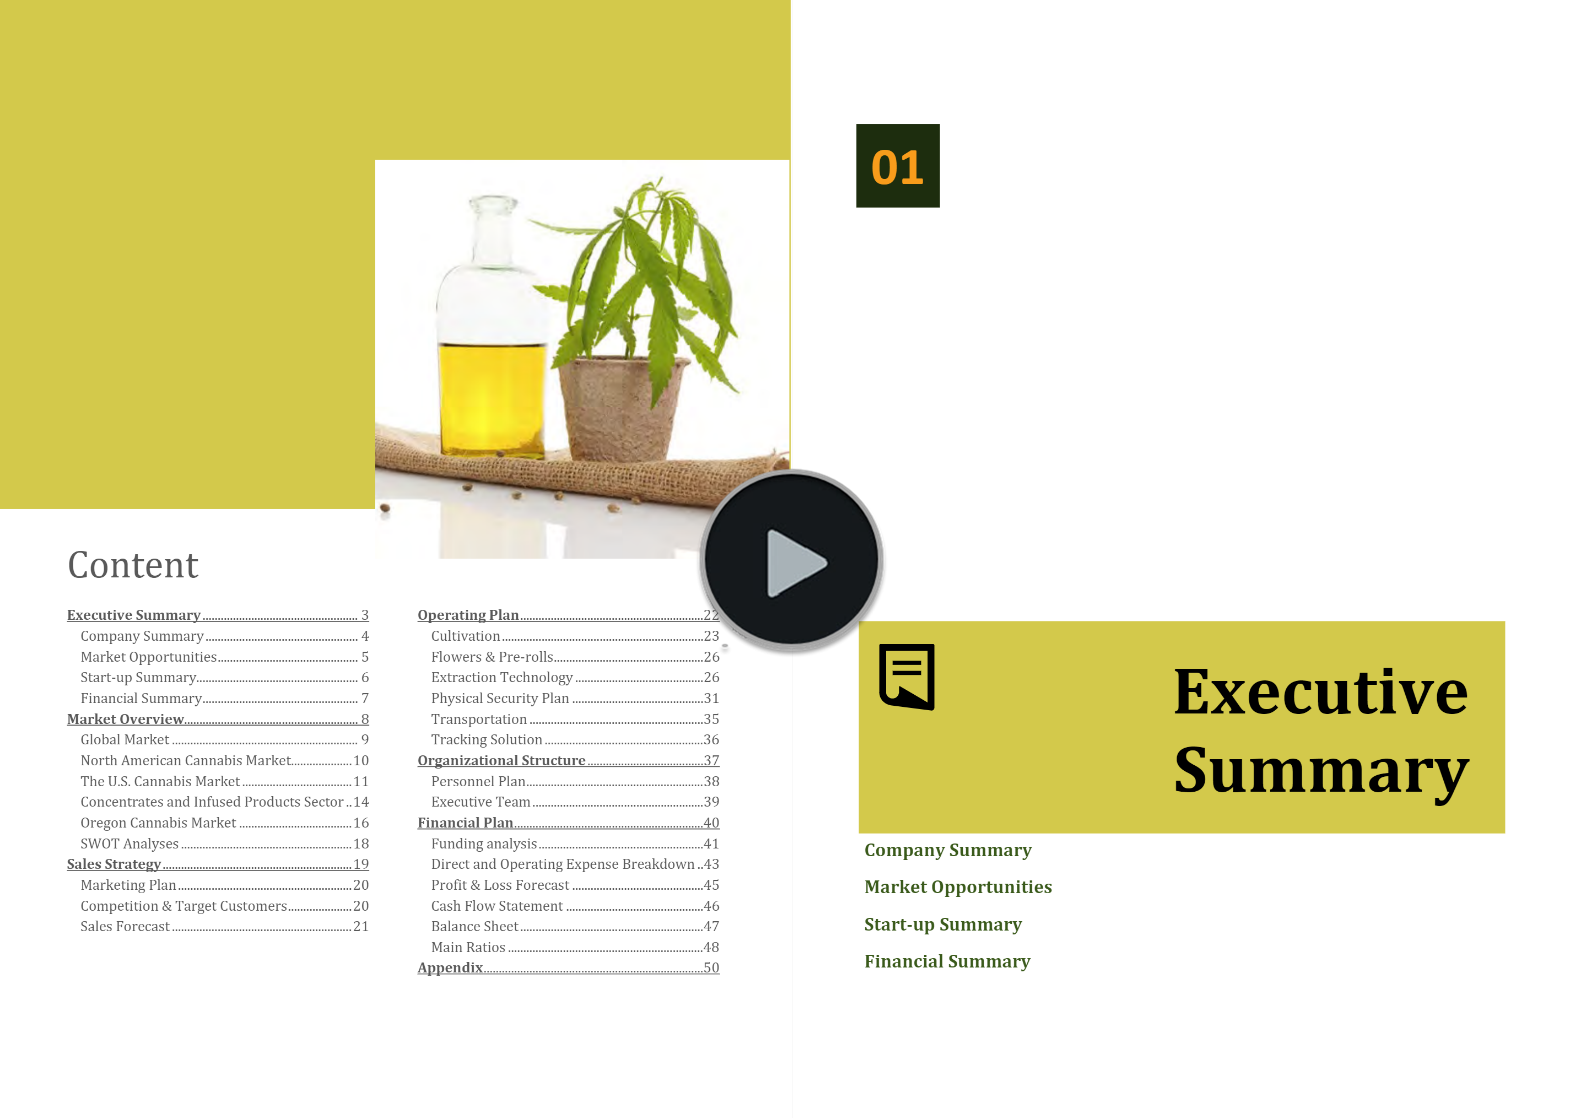 Cannabis Cultivation Extraction Business Plan Template